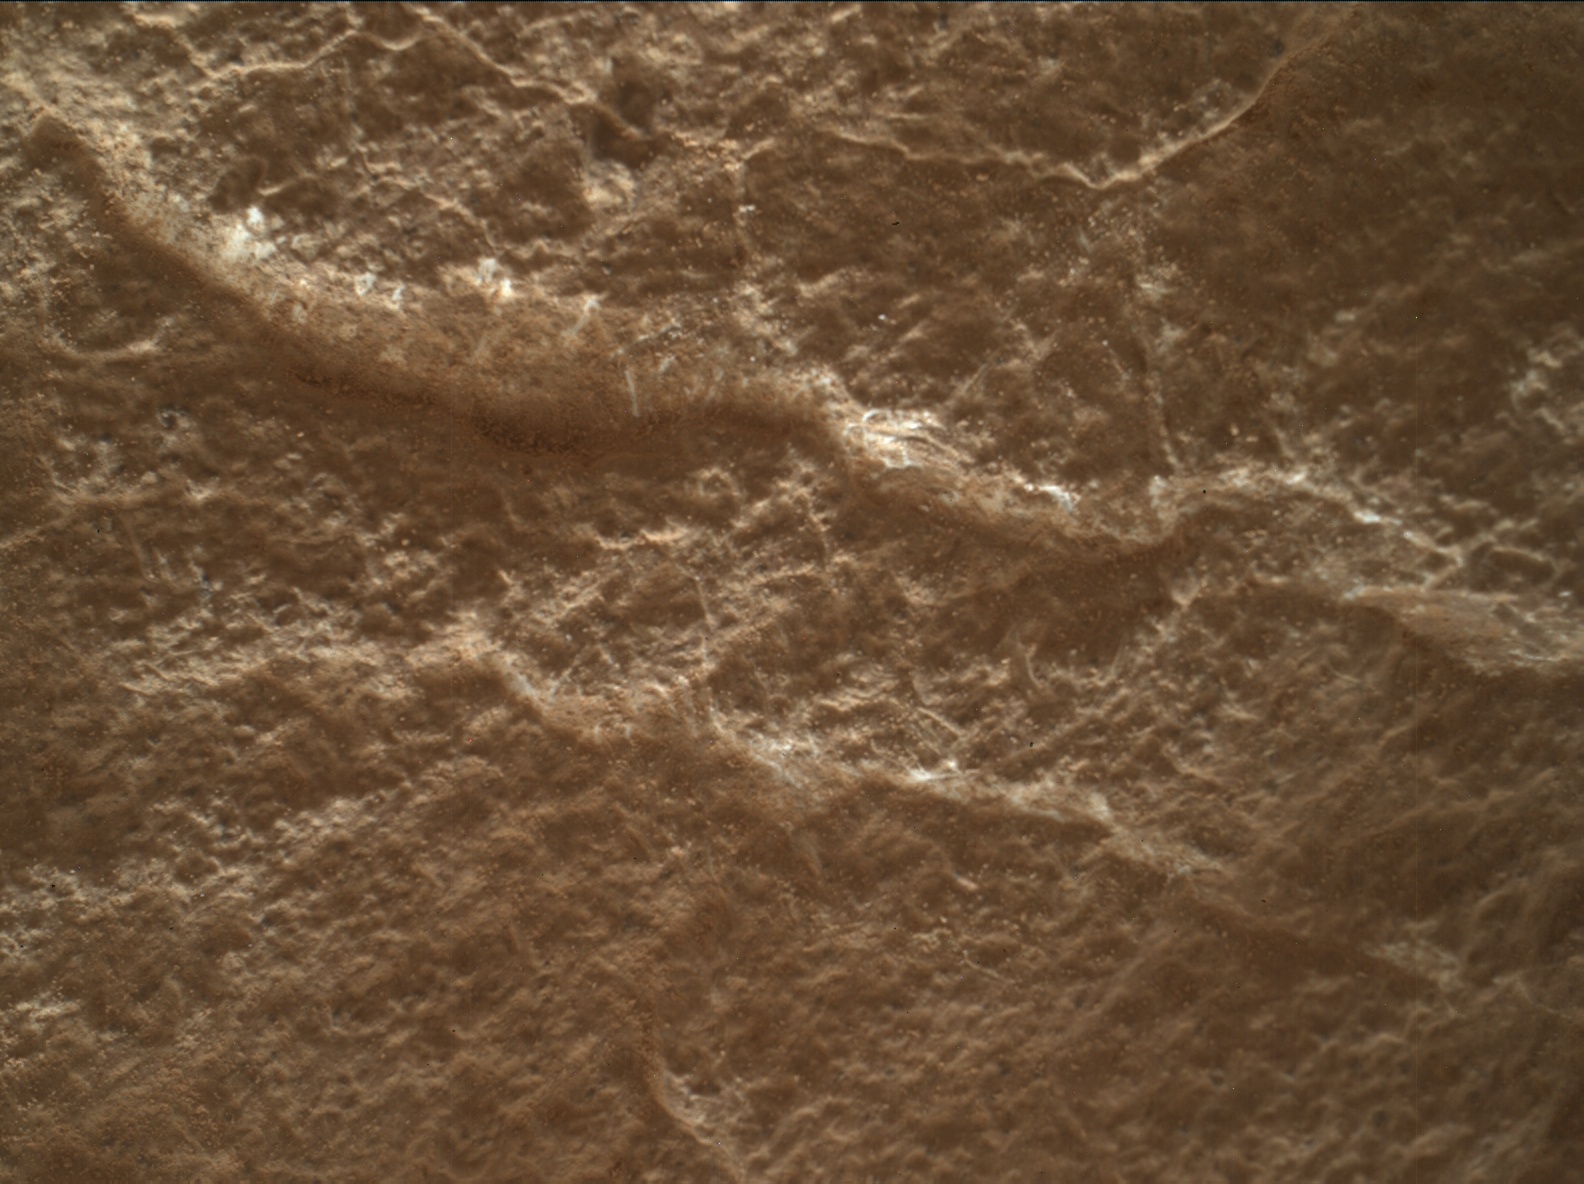 Nasa's Mars rover Curiosity acquired this image using its Mars Hand Lens Imager (MAHLI) on Sol 3657